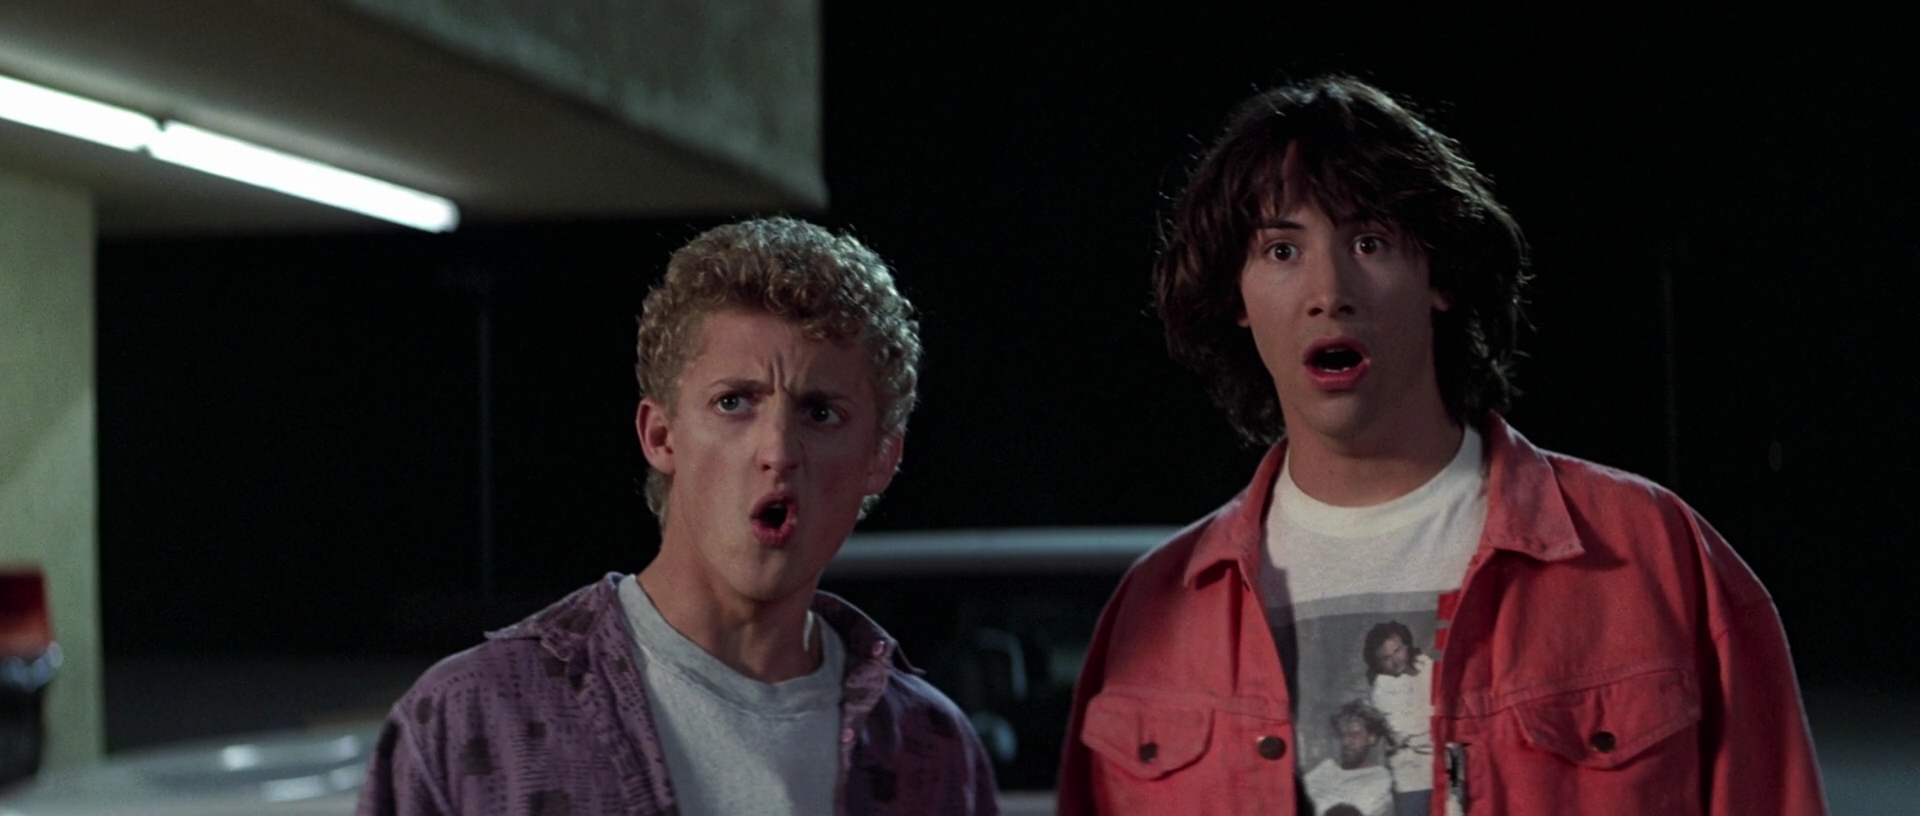 Screen Captures - Bill-and-Teds-Excellent-Adventure-0234 - Keanu Reeves Onl...